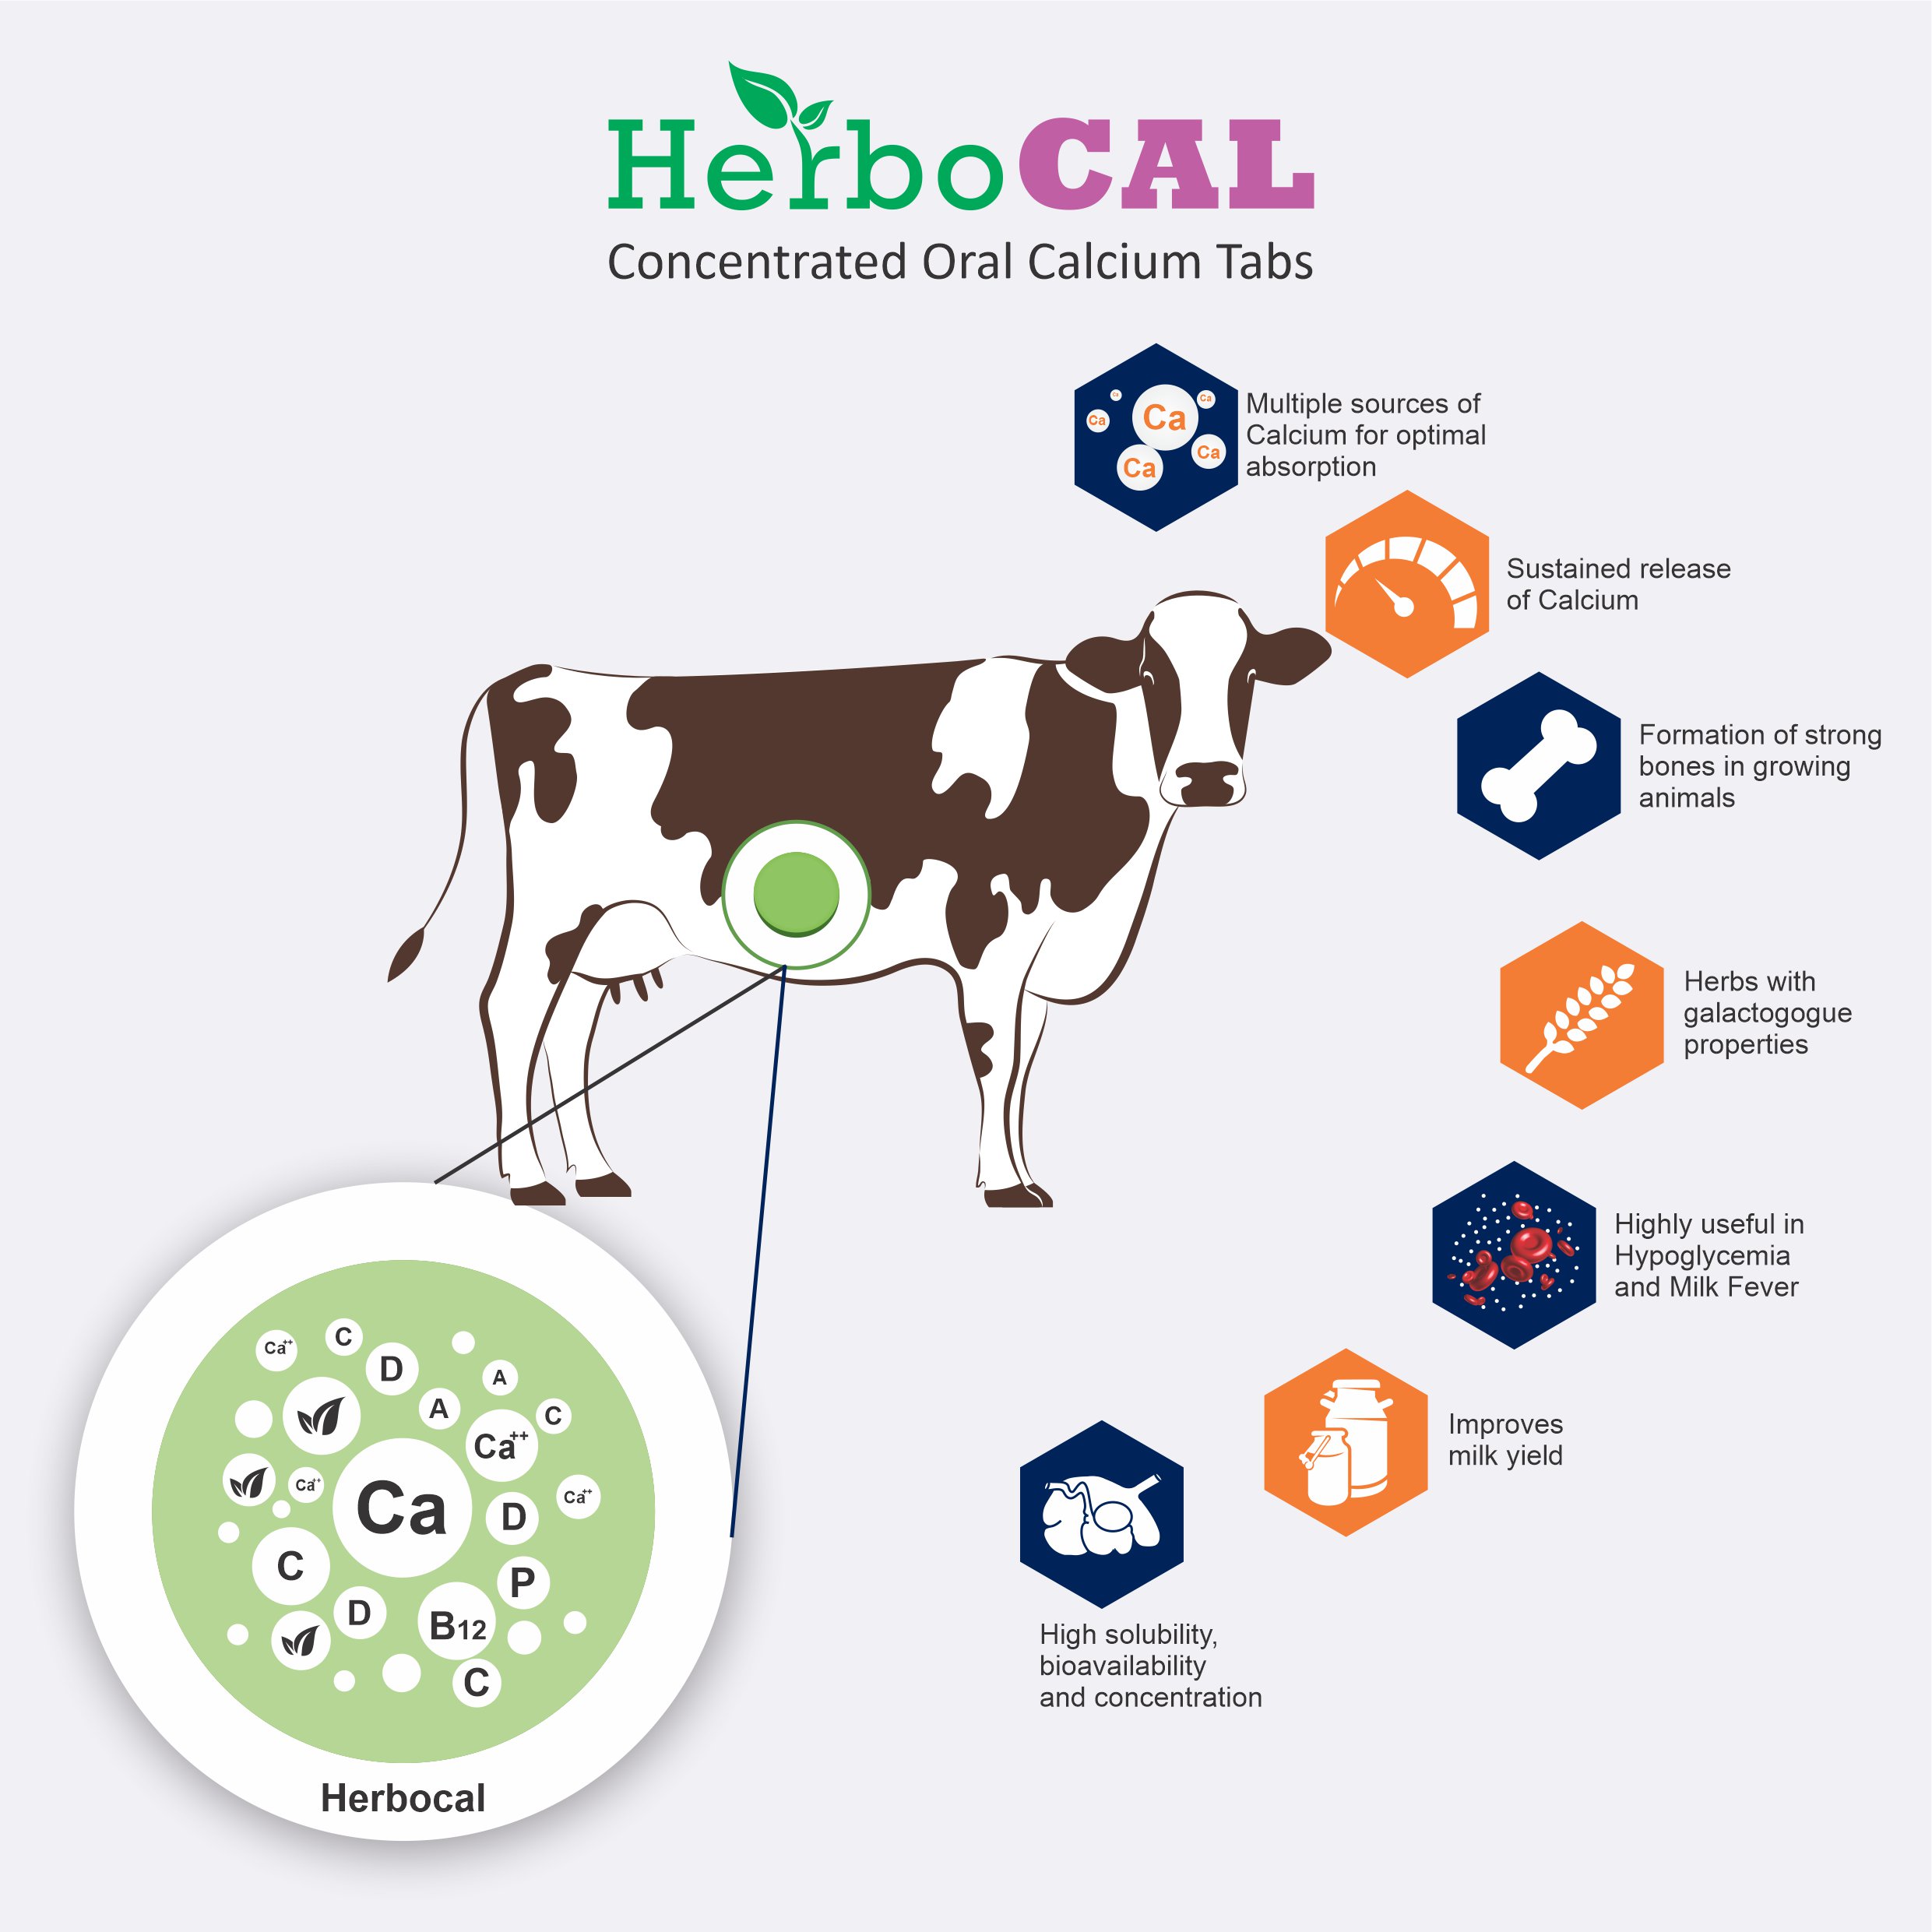 herbocal - MOA - Mechanism of action - Improved Ruminal Health, Maintain the rumen osmolarity, Neutralizes the acid content in the rumen, Improving health of cattle.